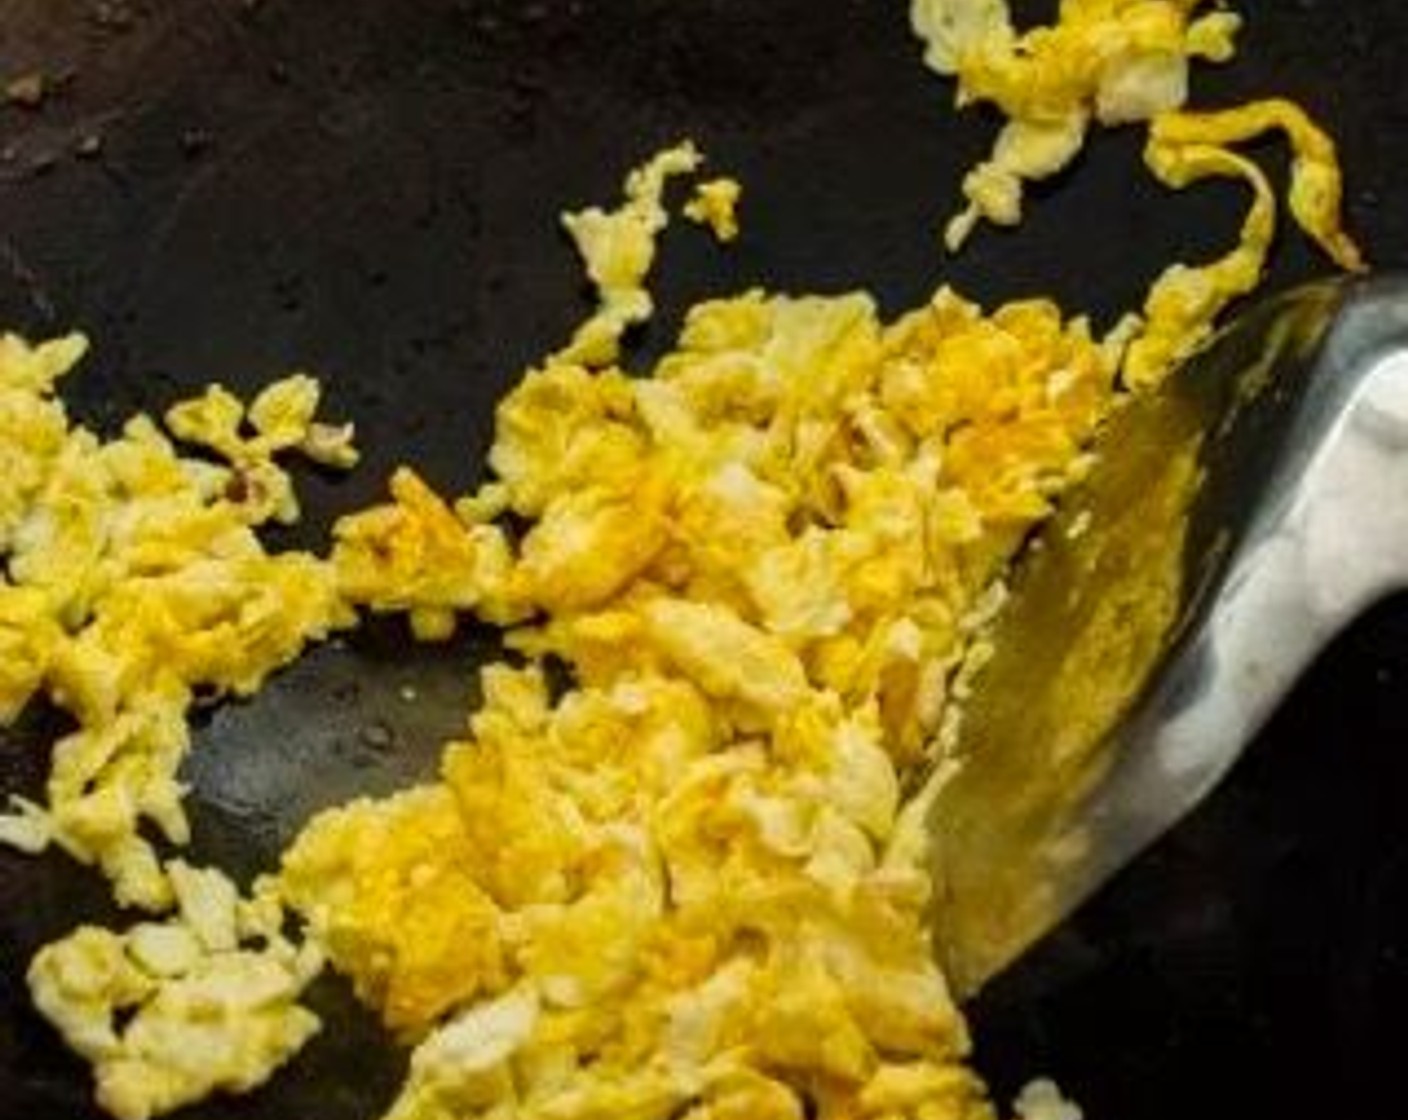 step 2 Add Cooking Oil (1 Tbsp) to the wok, followed by the Eggs (2). Allow the eggs to set, about 30 seconds, then scramble the eggs with your wok spatula. Remove the eggs from the wok and set aside.